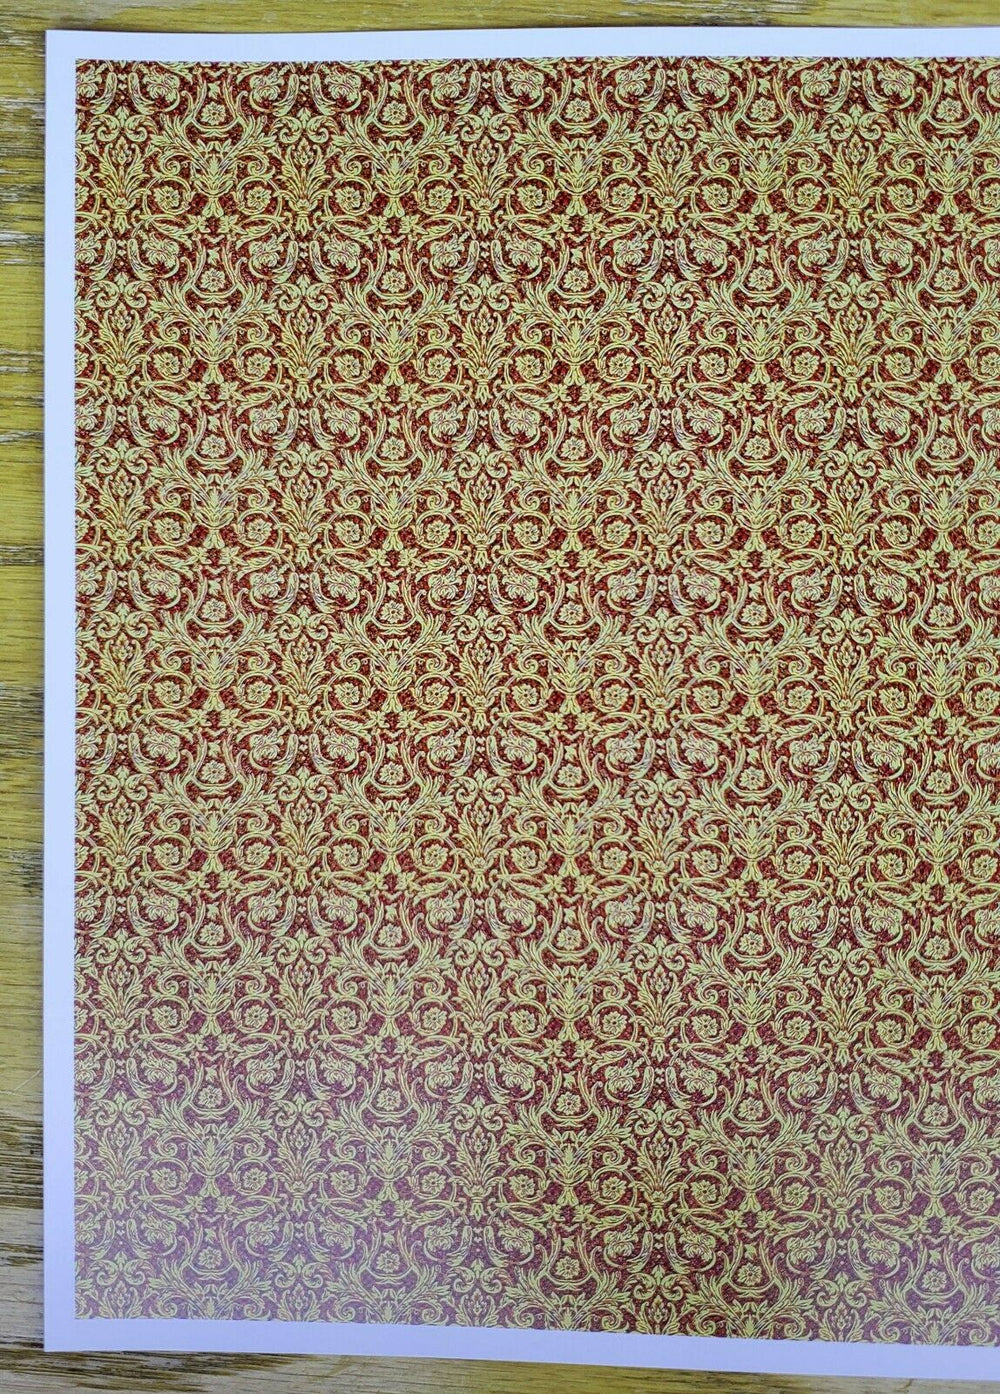 Dollhouse Wallpaper Gold on Red Festive Damask 1:12 Scale Itsy Bitsy - Miniature Crush